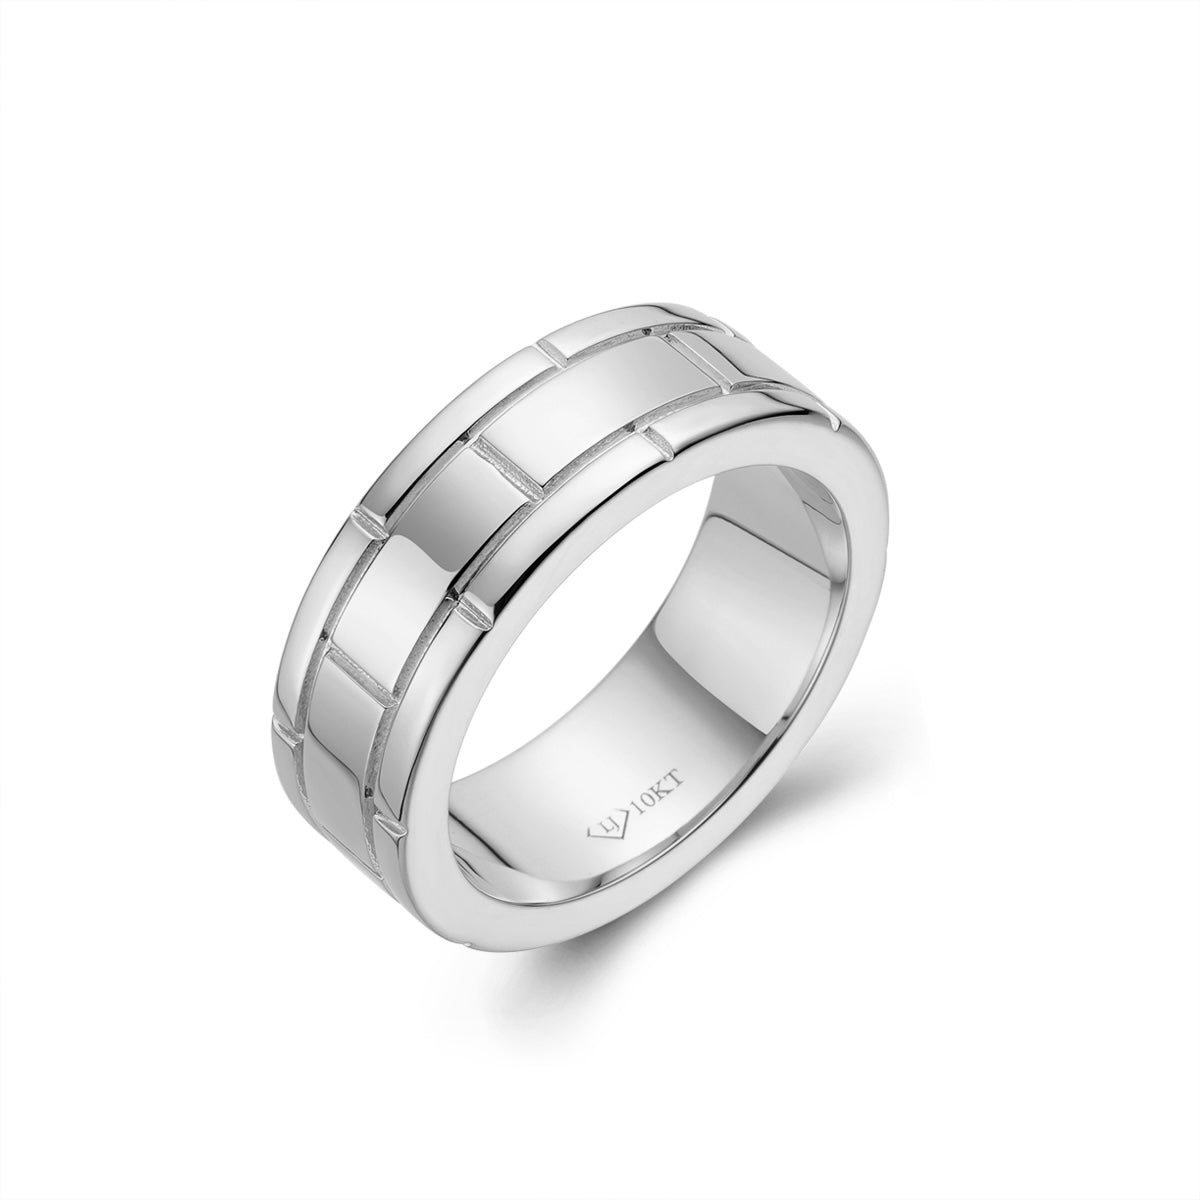 Solid 925 Sterling Silver Wedding Band Rings For Men And Women – Donatello  Gian